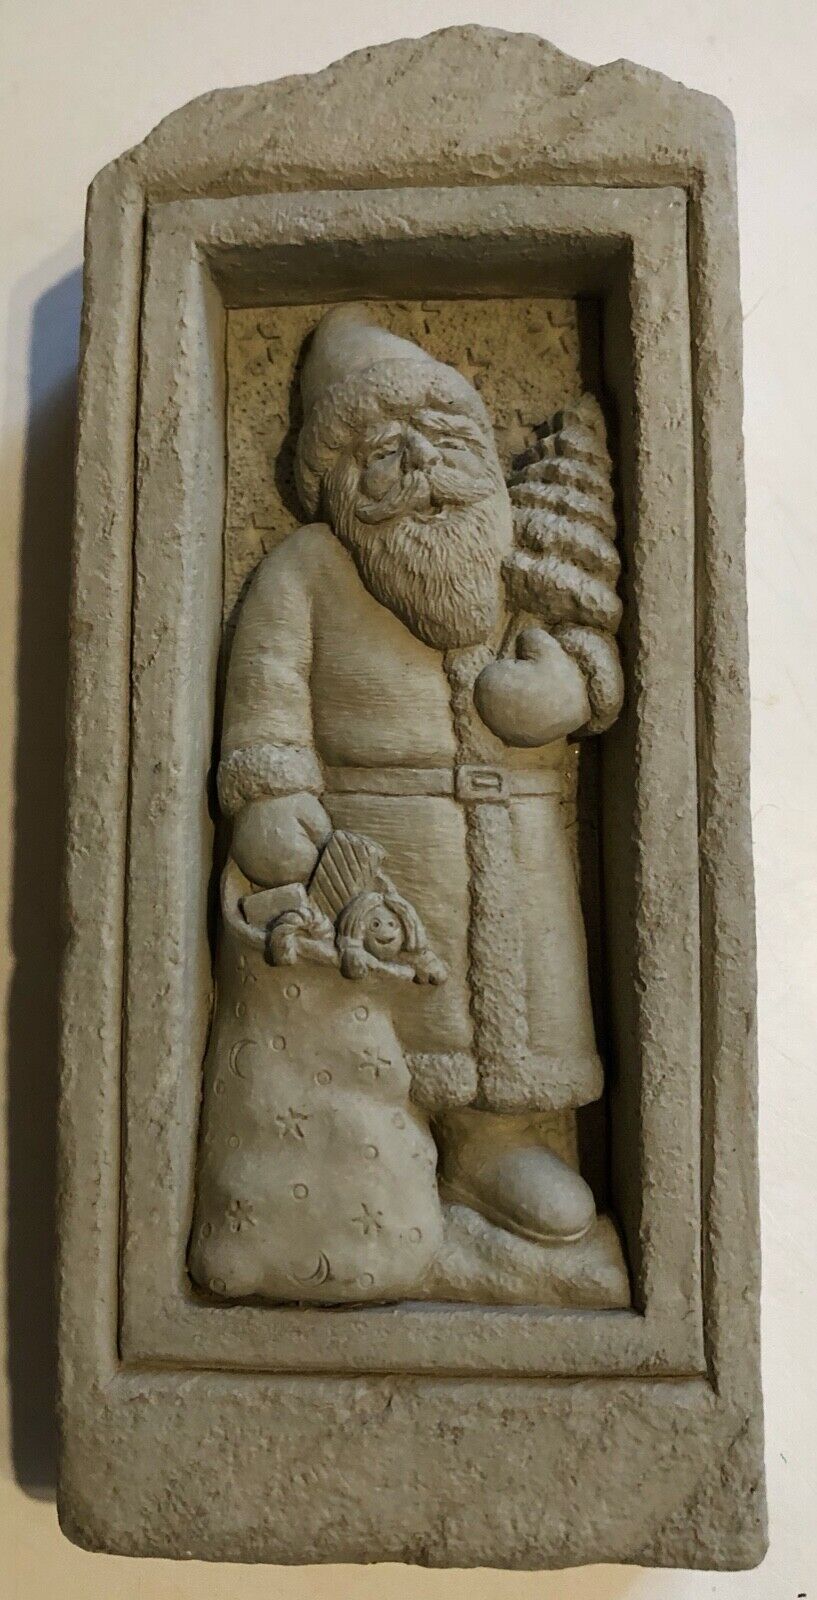 CARRUTH STUDIOS SANTA W. TREE & TOY BAG,  STANDING OR WALL PLAQUE, 1995, SIGNED